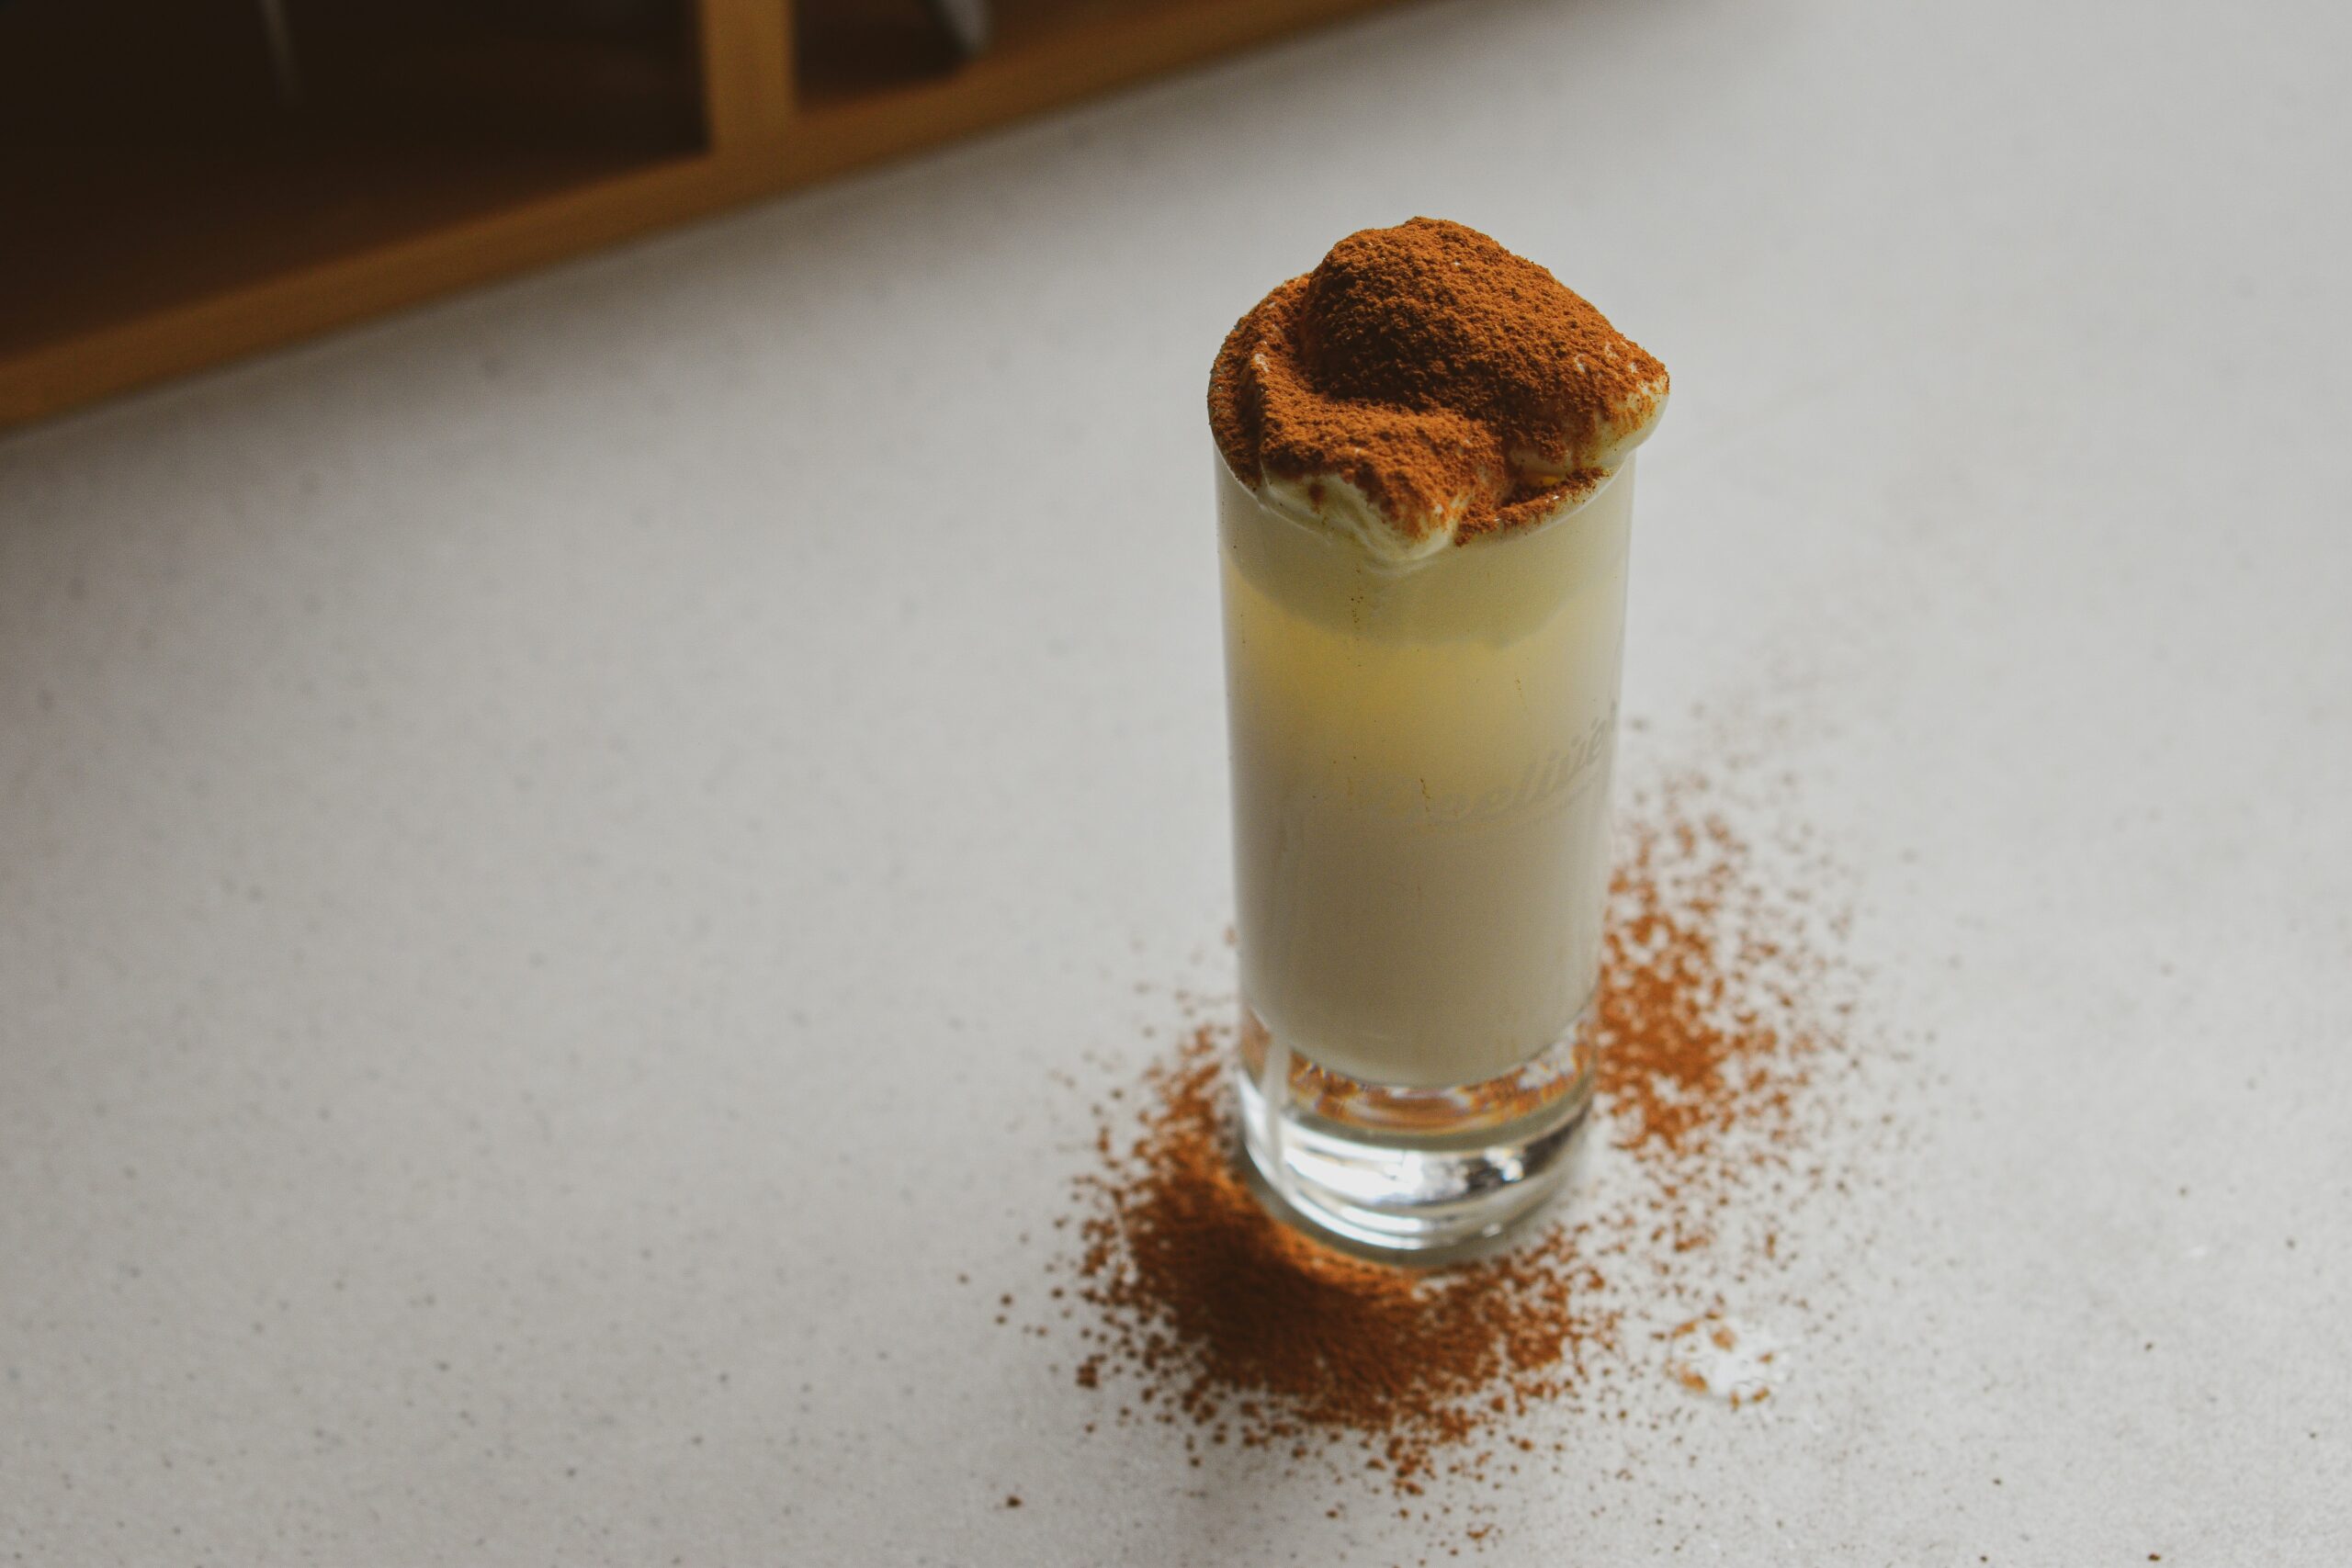 For a decadent drink, this Nespresso recipe is great. Pictured: Tiramisu latte